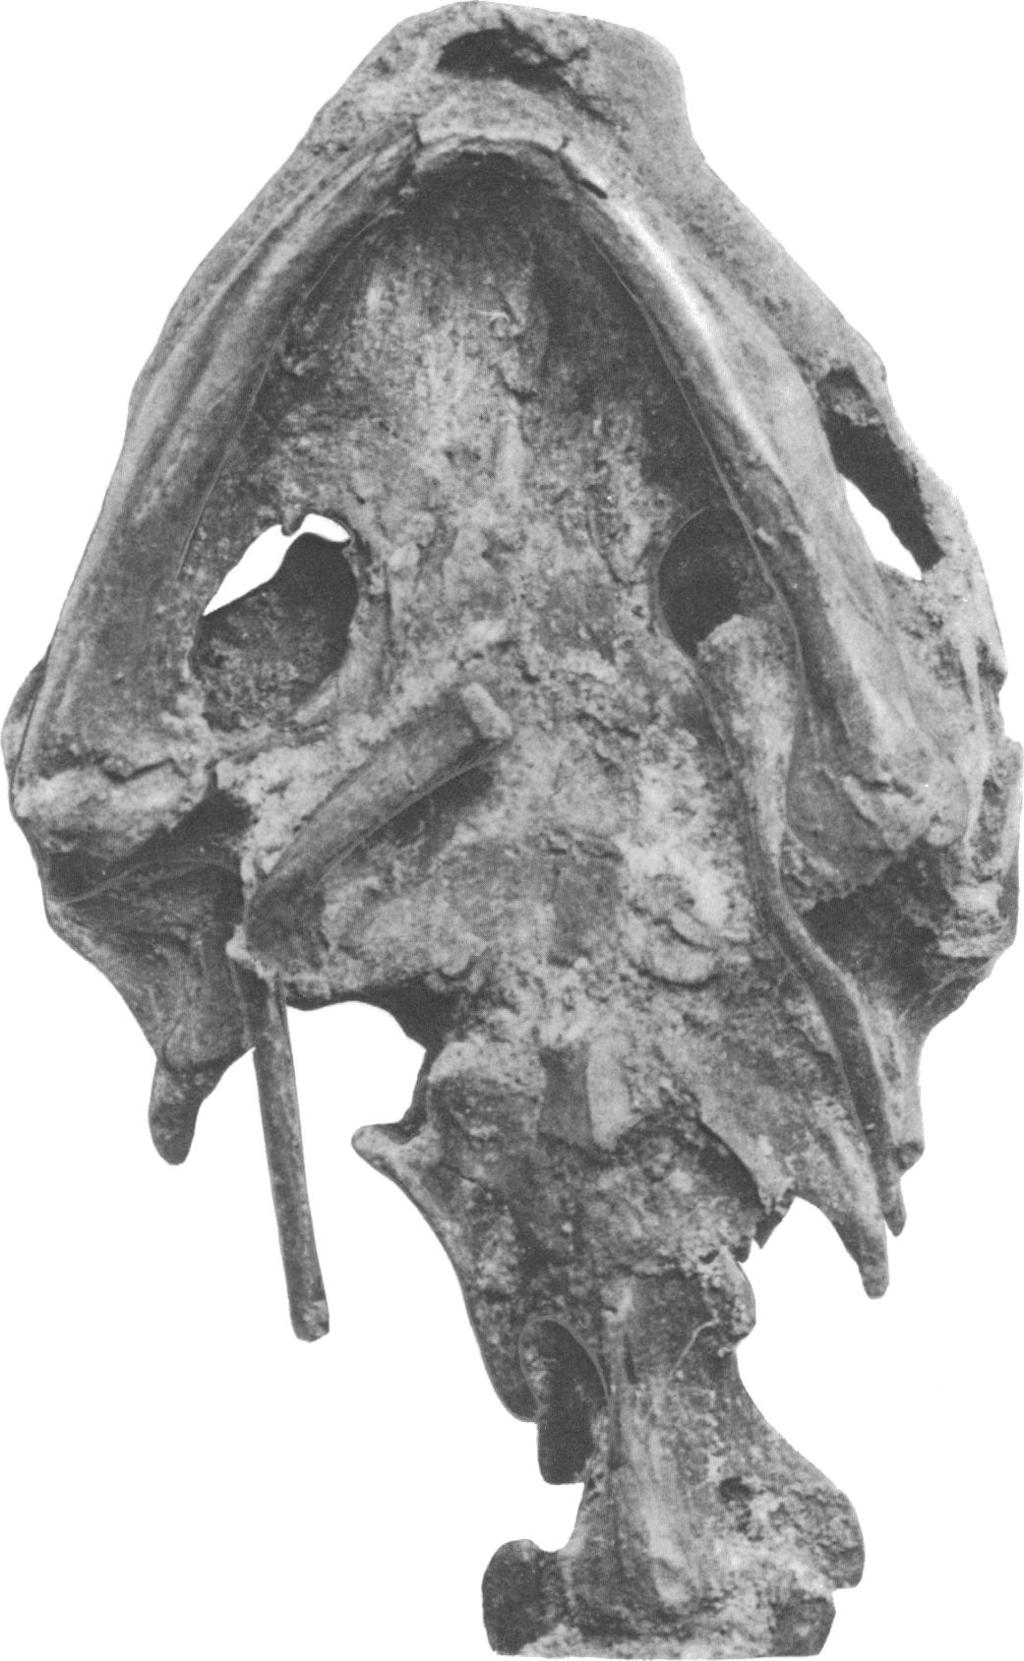 The fissura is completely preserved only in one skull ofbaptemys (AMNH 5967) and is partially broken in both Adocus skulls.